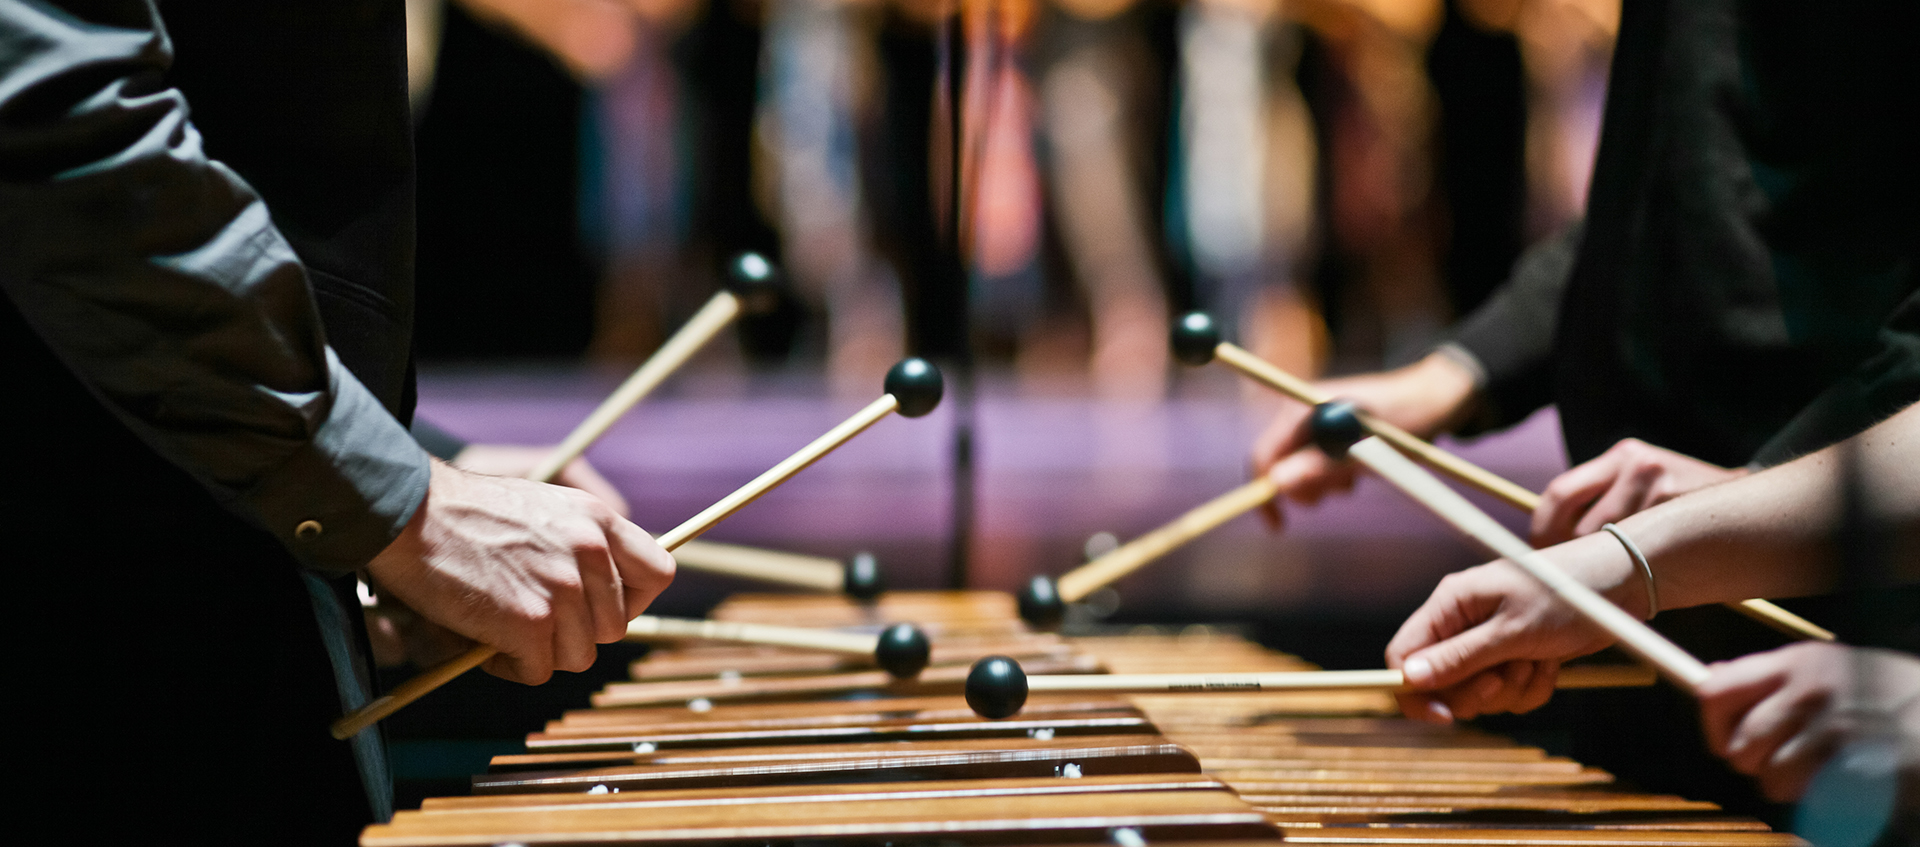 A group of percussionists play a marimba, only their hands and arms are visible in the frame.